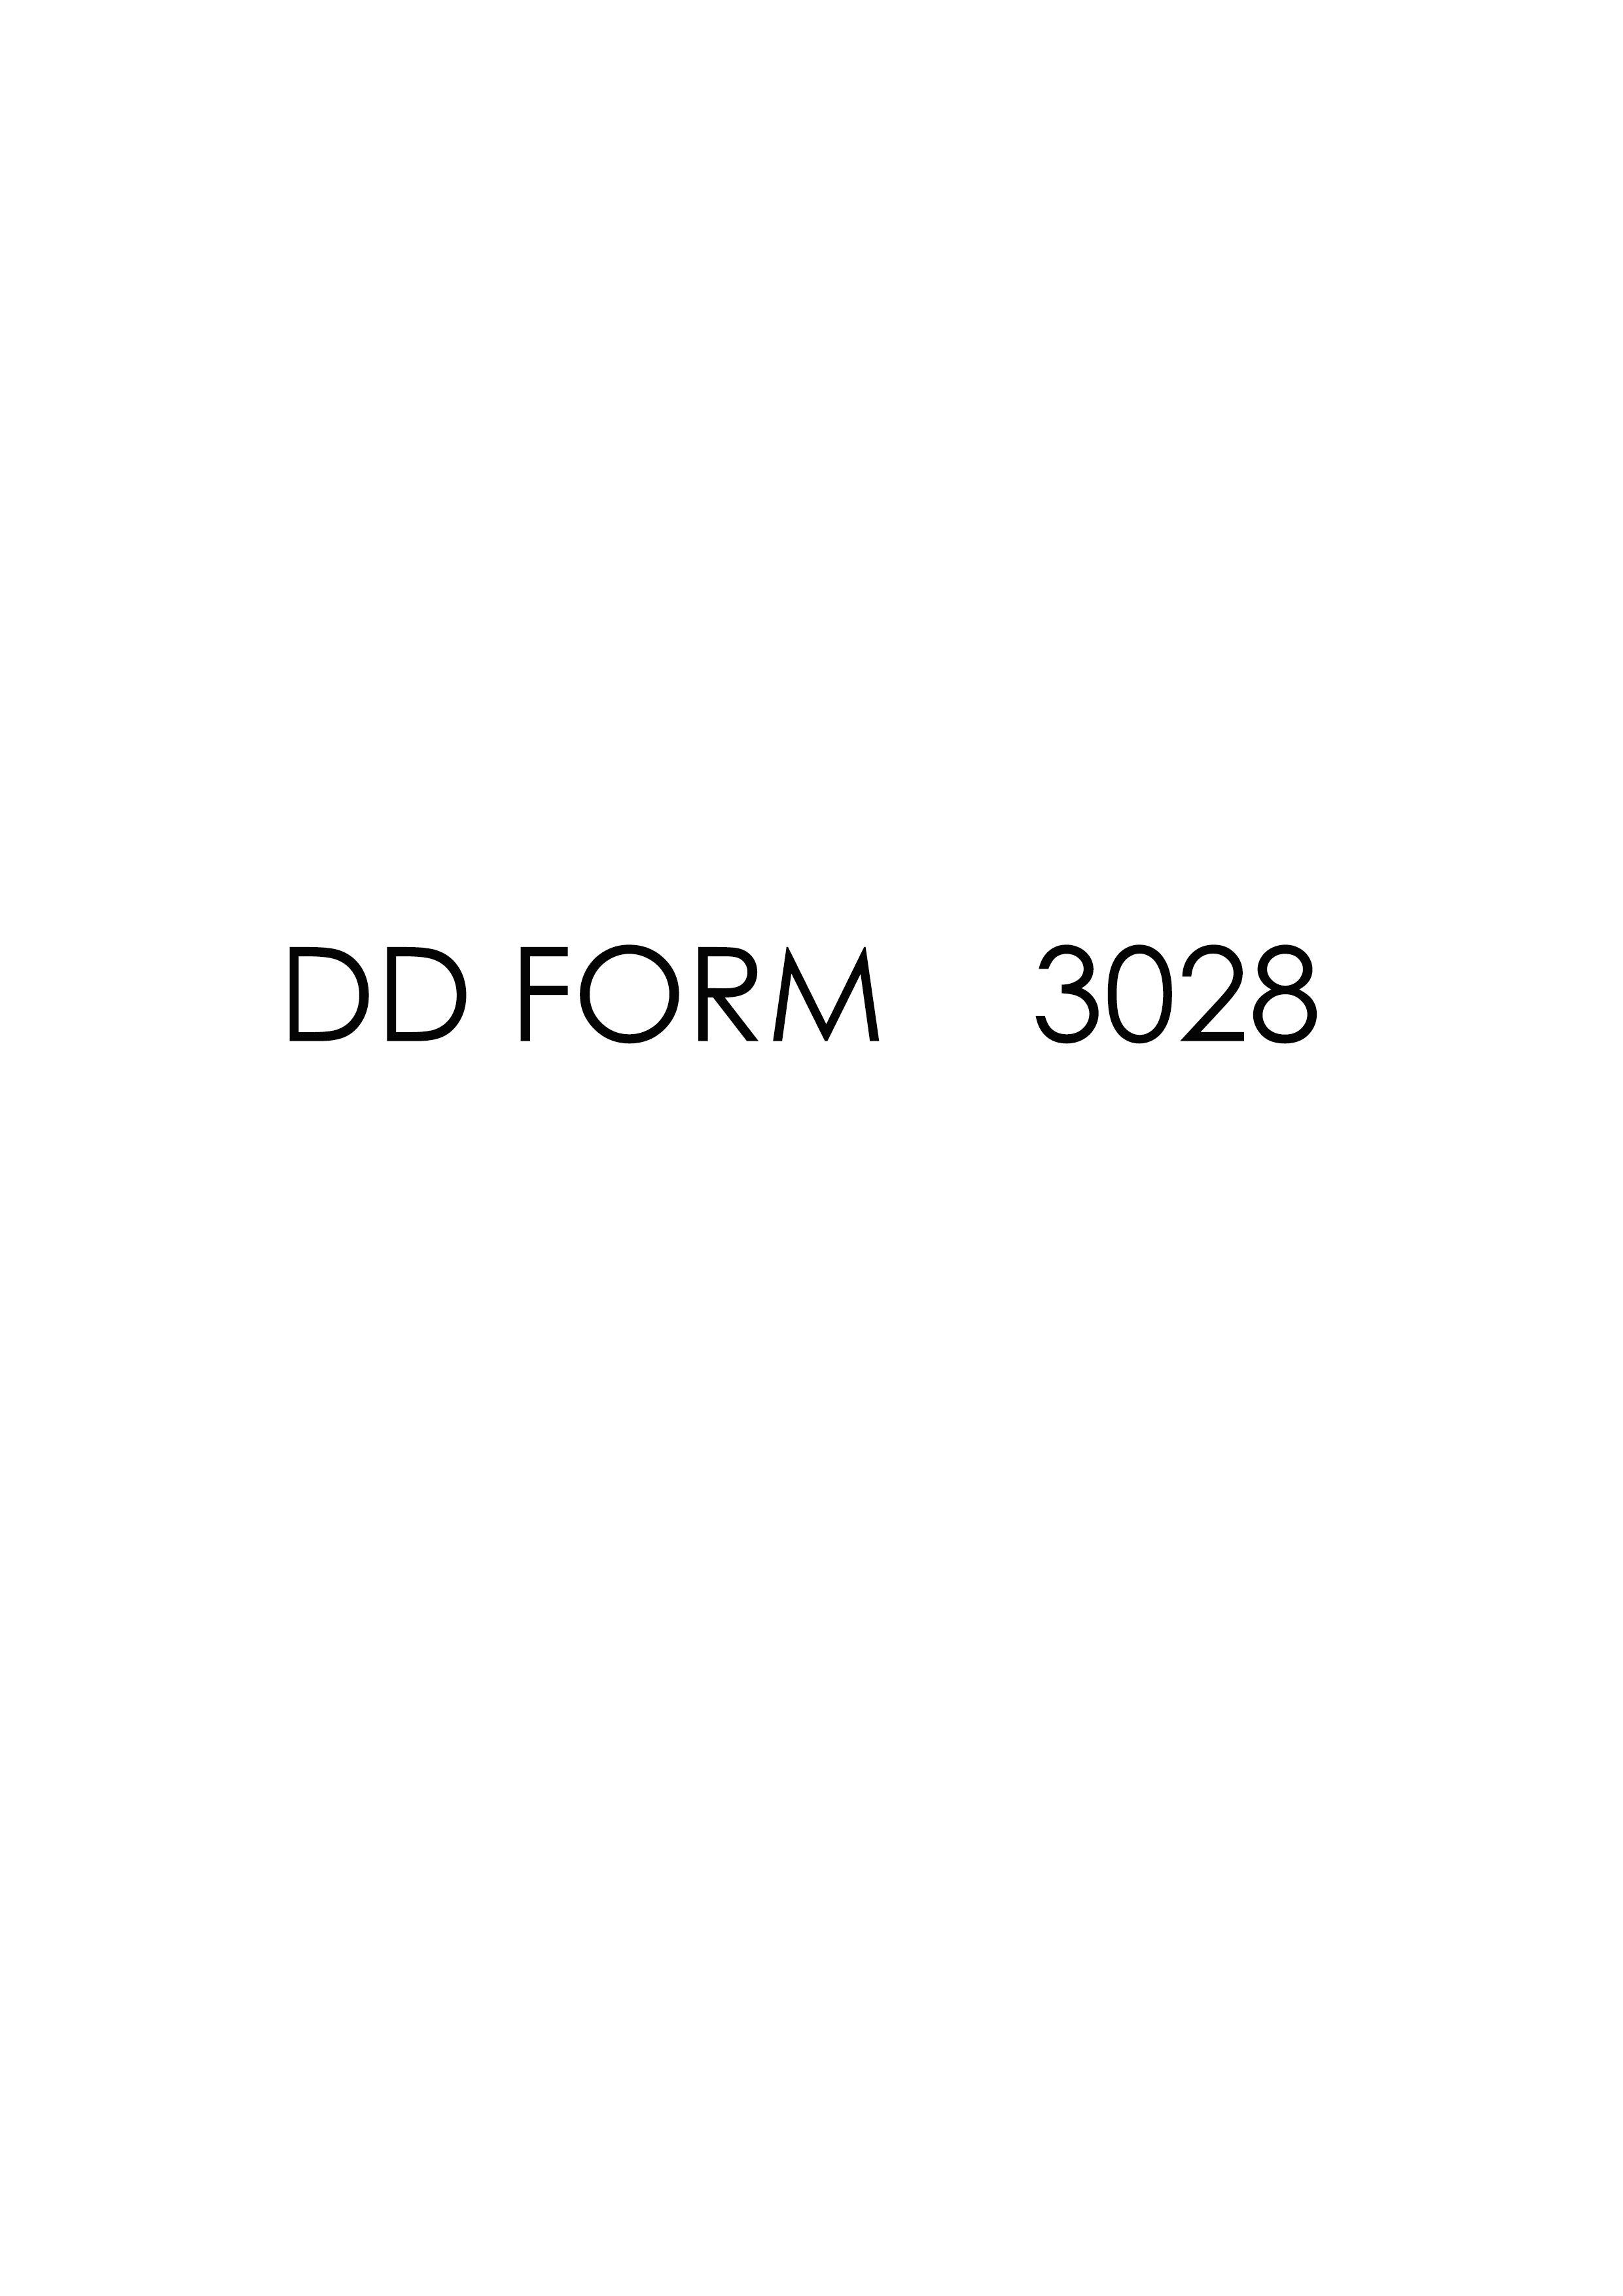 Download Fillable dd Form 3028